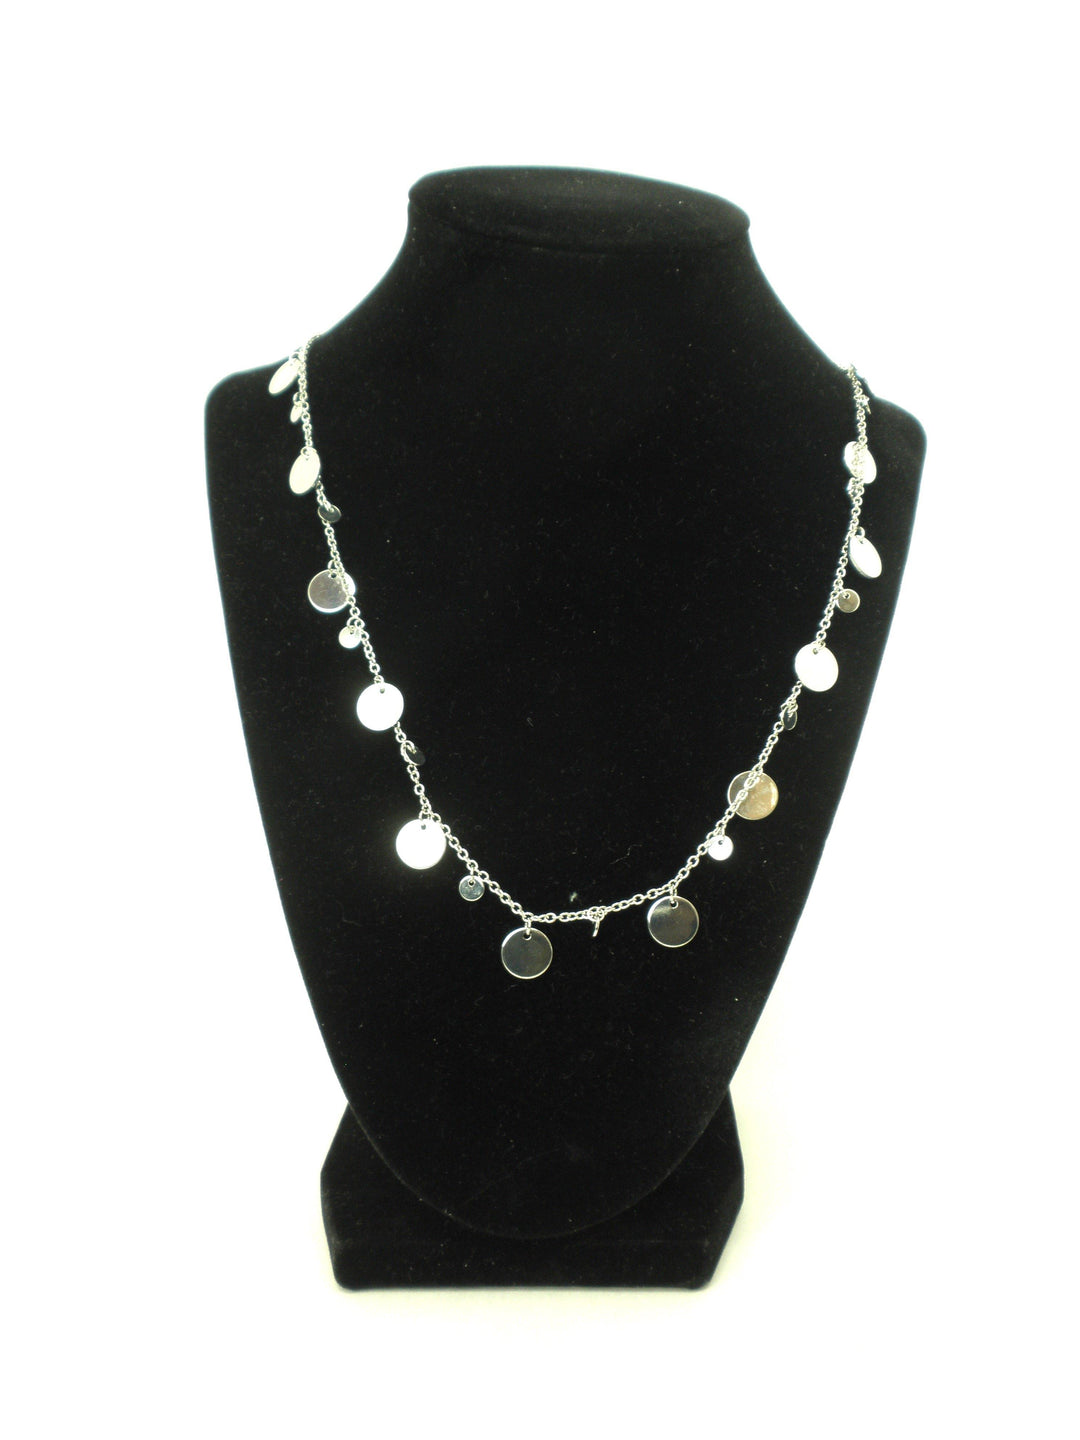 Necklace Lined with Silver Circles - The Fashion Foundation - {{ discount designer}}